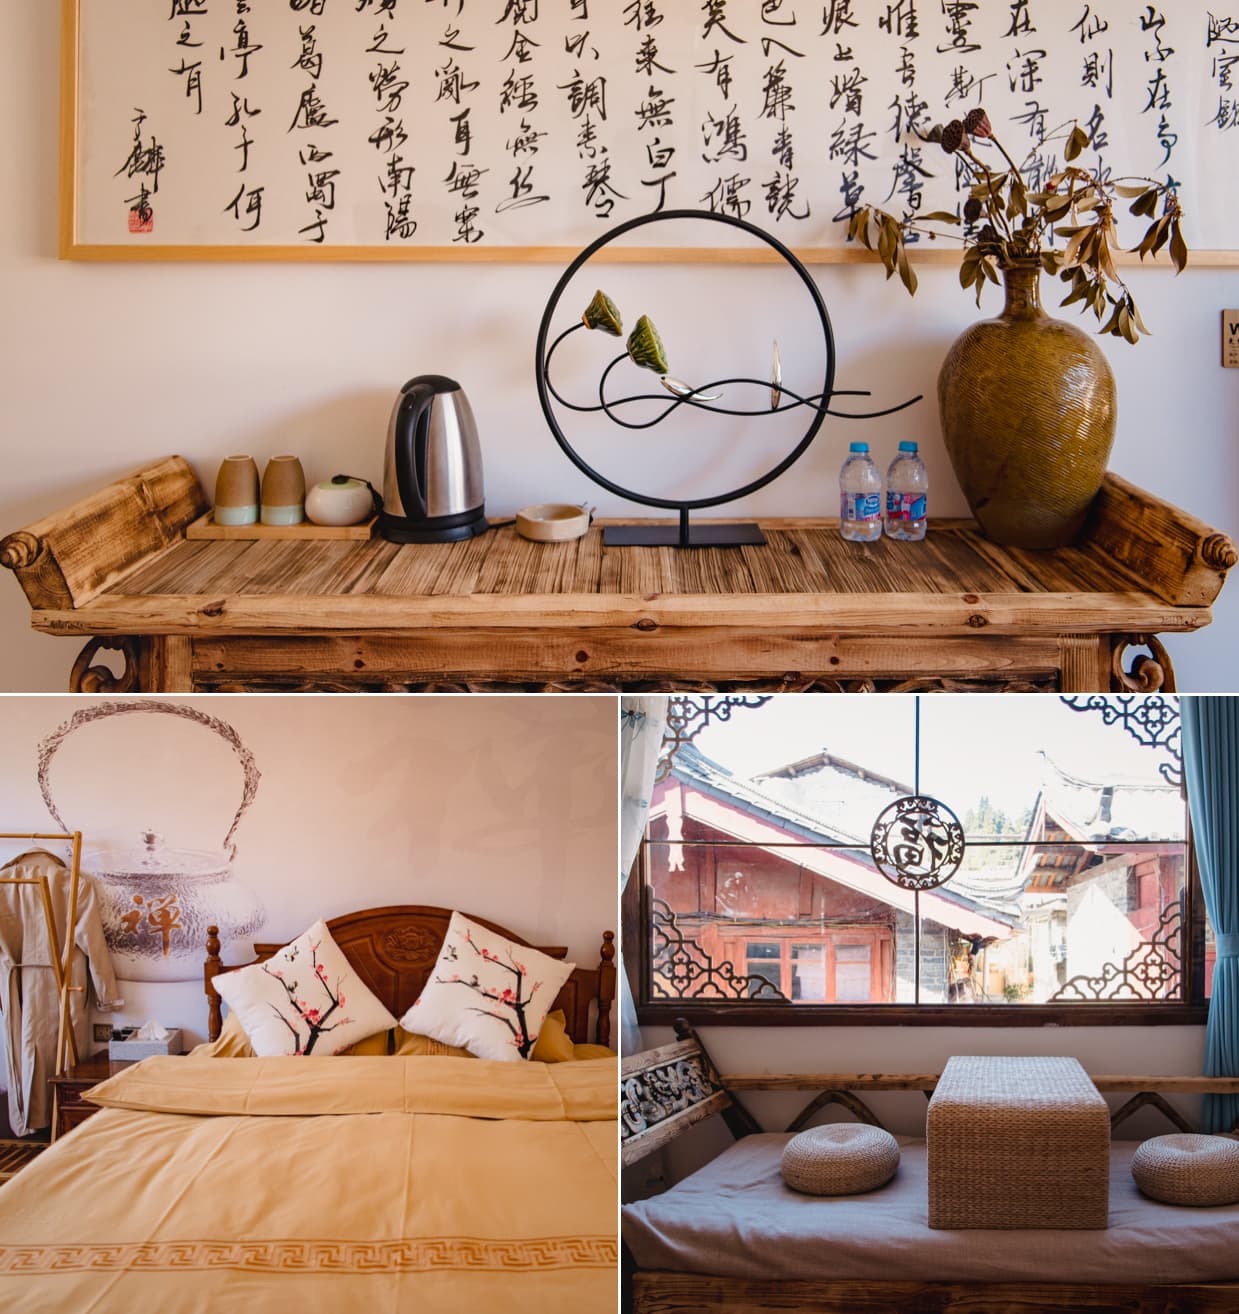 Our hotel bedroom in Lijiang, China.